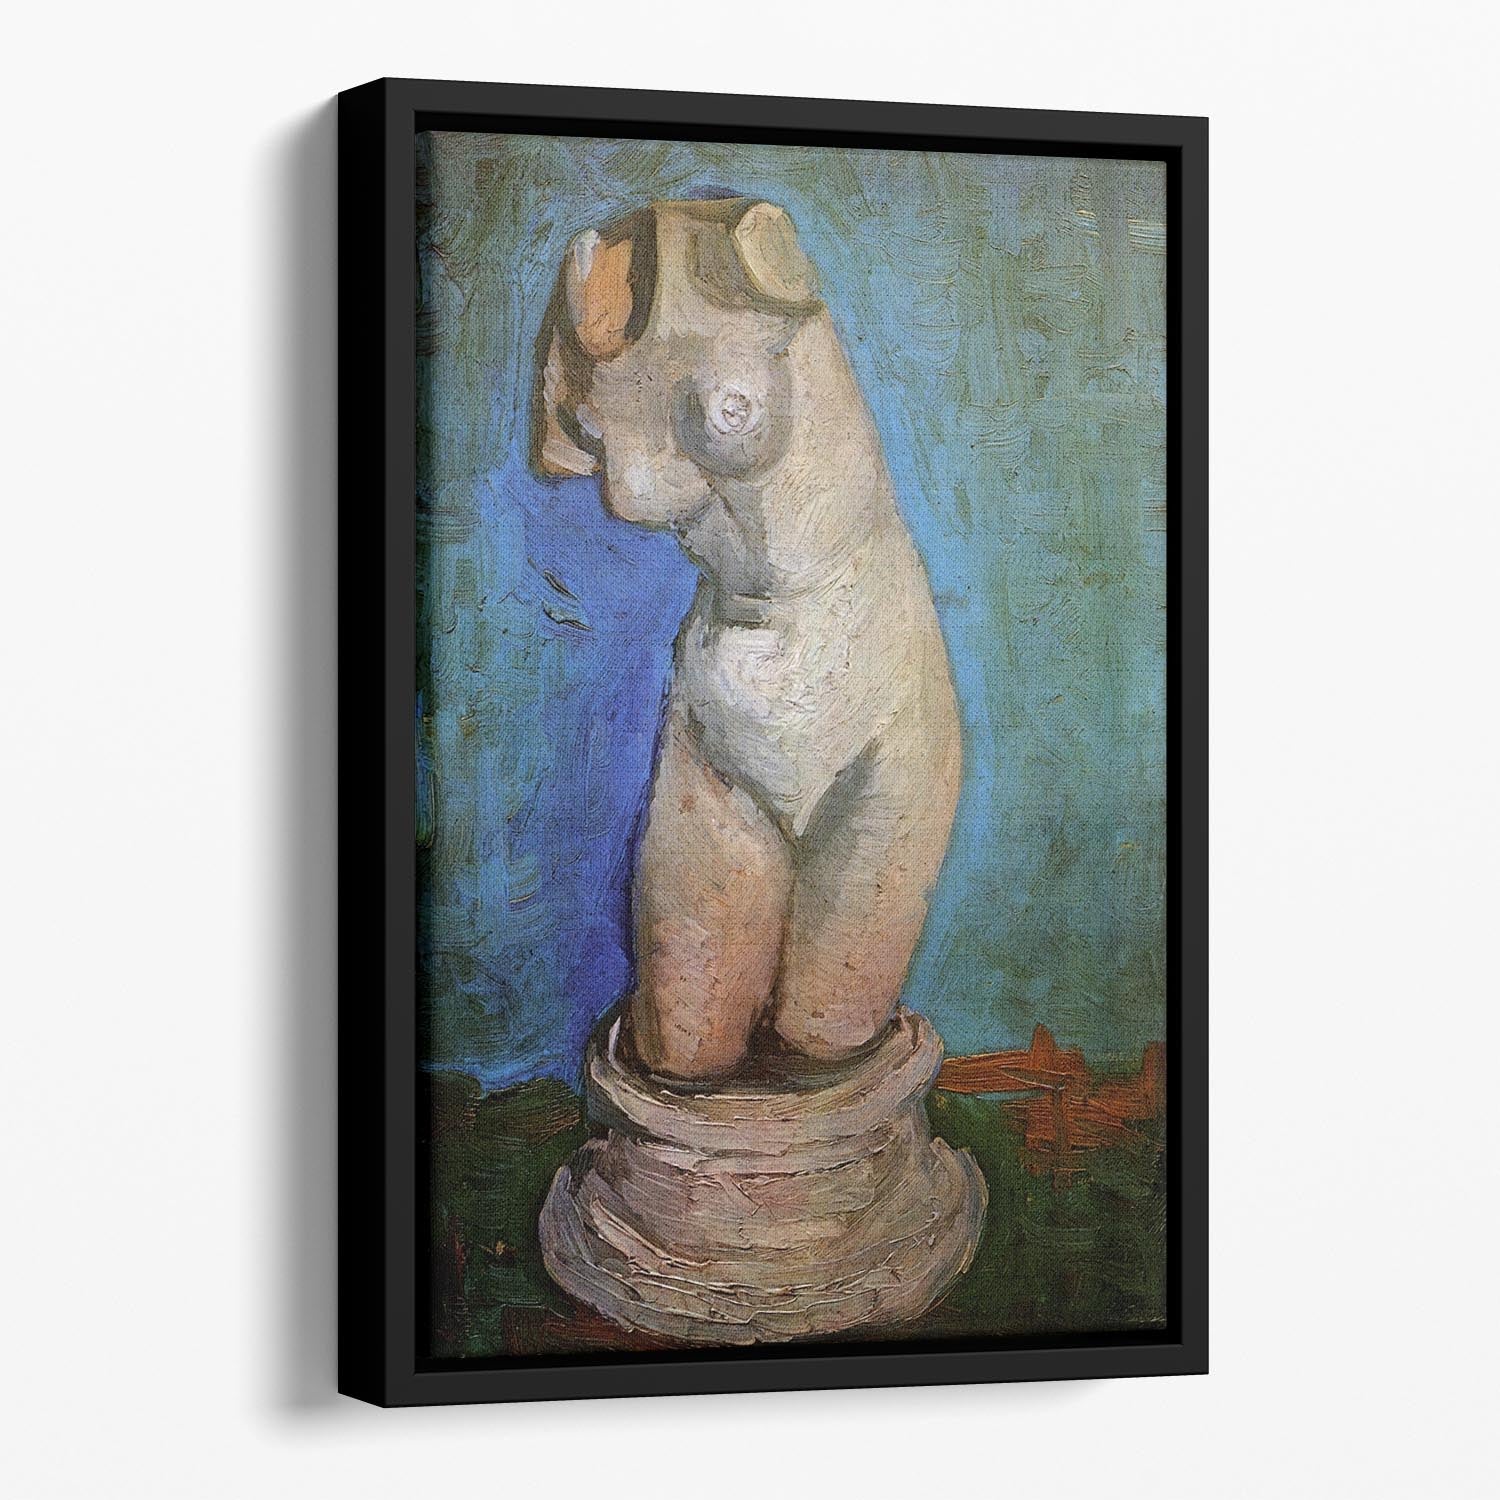 Plaster Statuette of a Female Torso 2 by Van Gogh Floating Framed Canvas